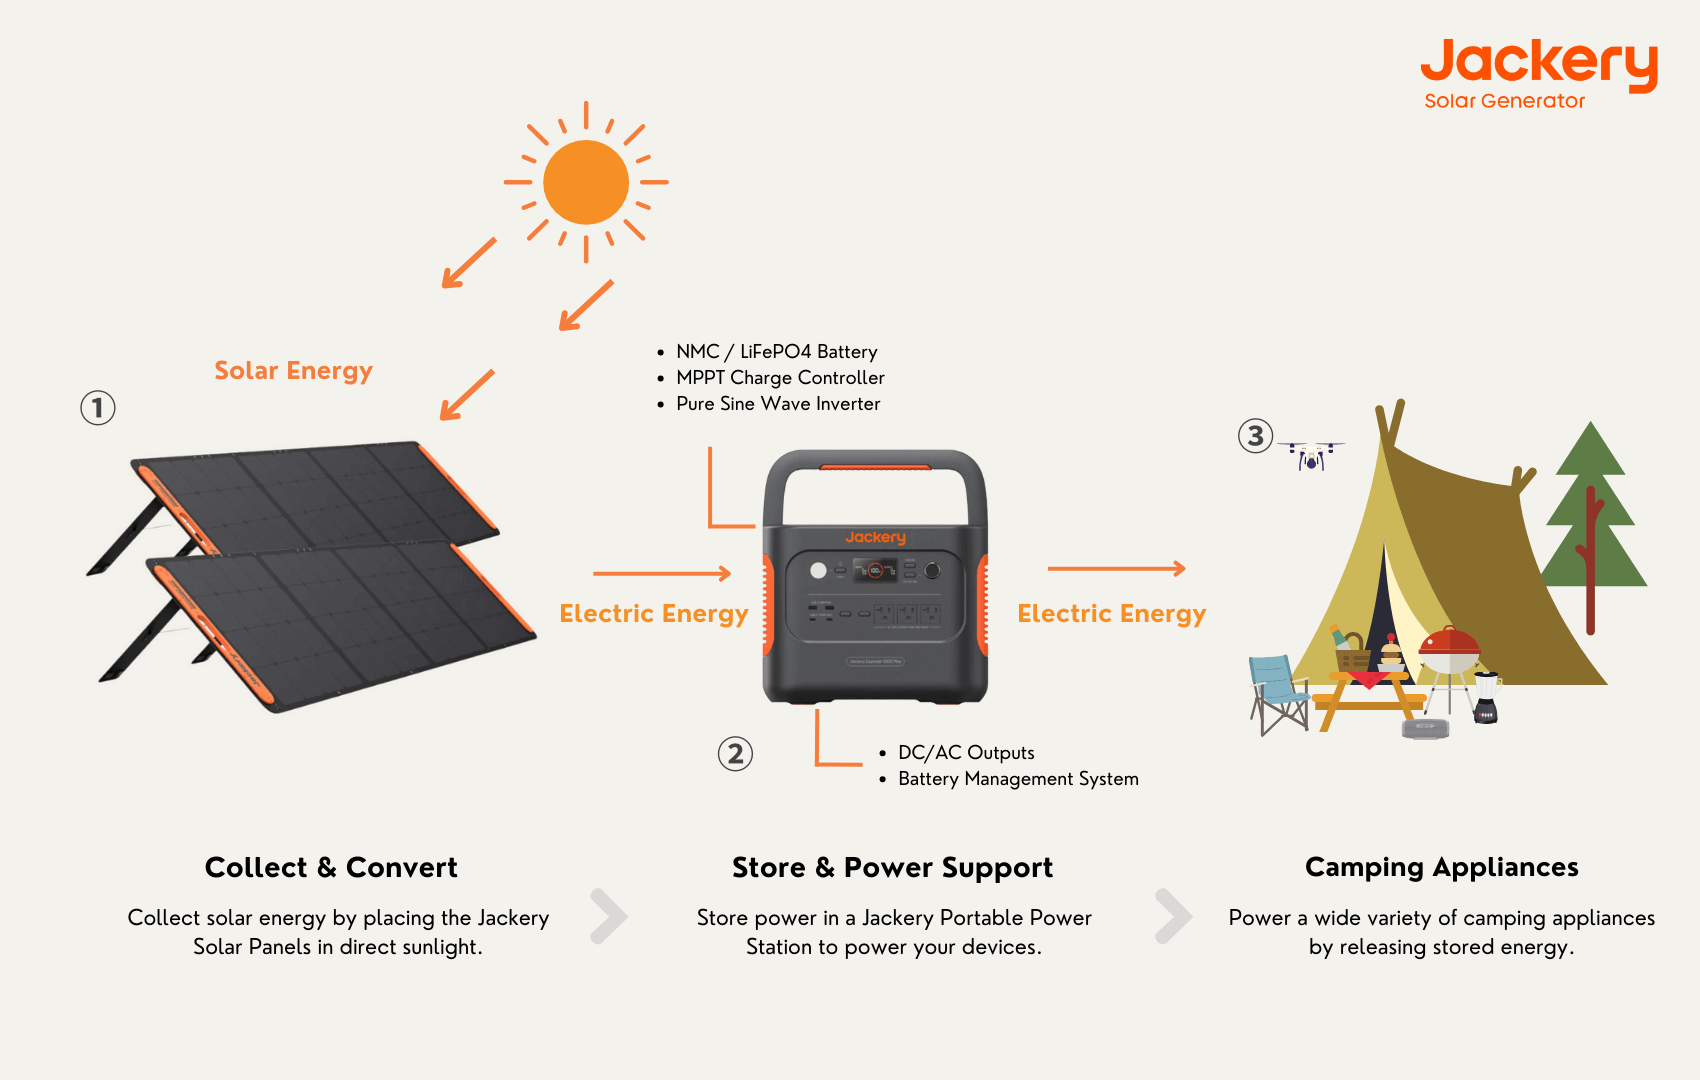 Jackery Solar Generators for Camping in The US